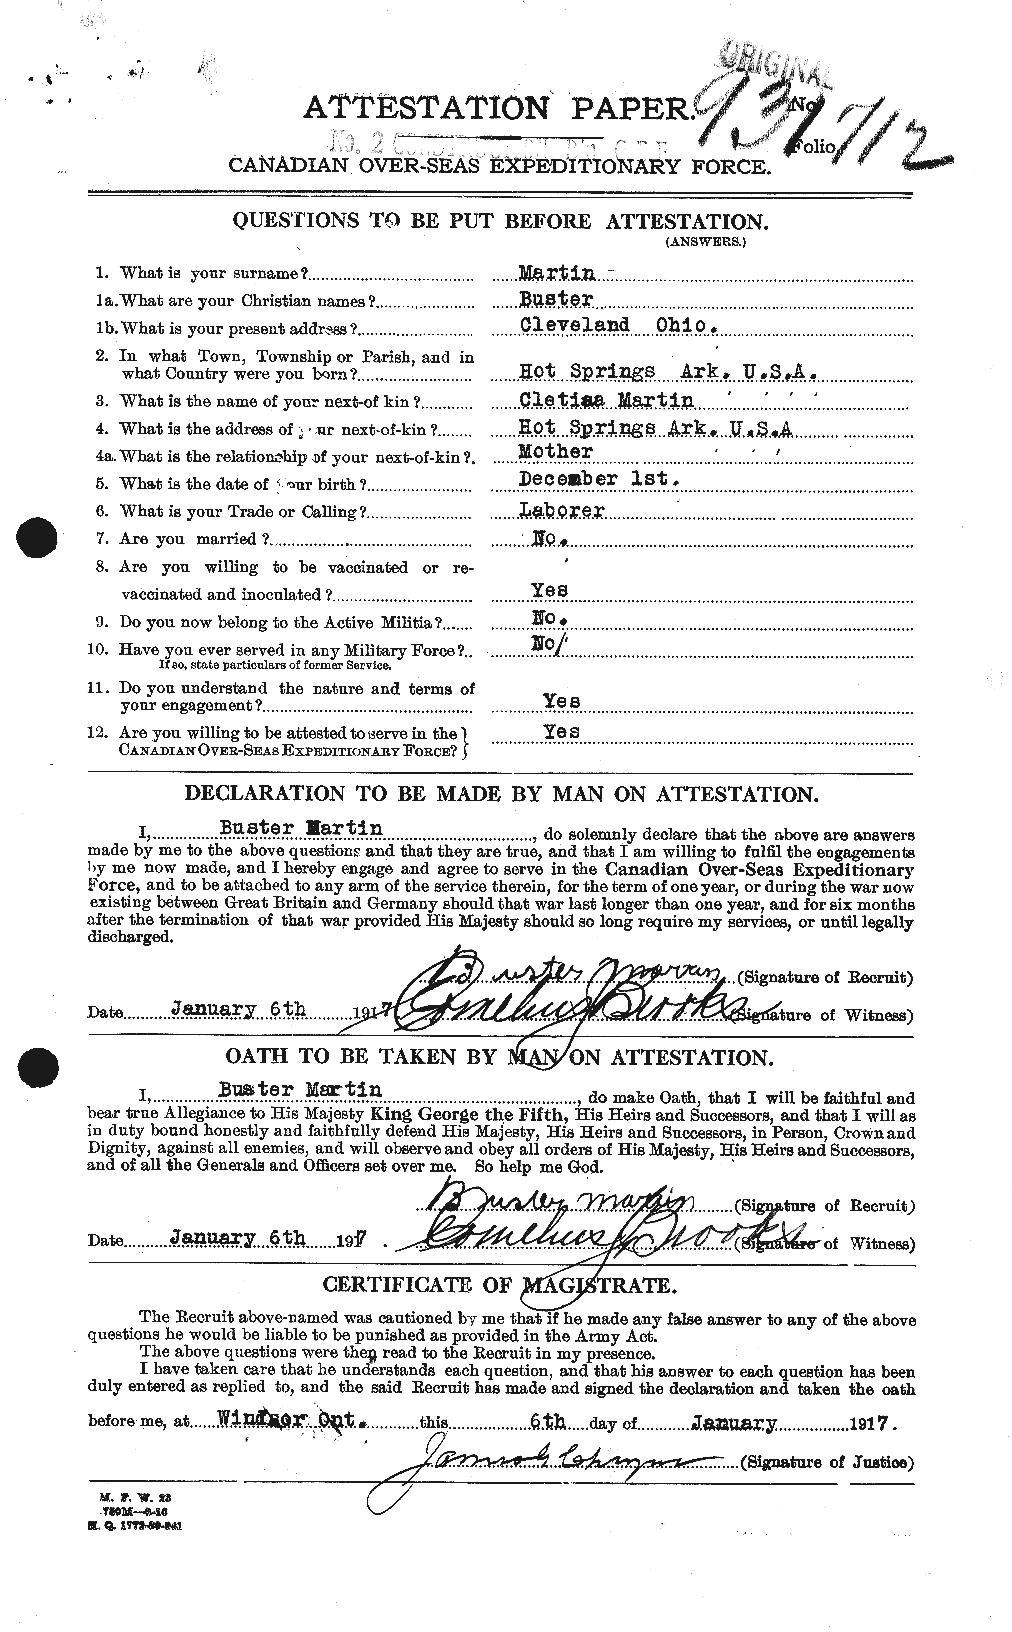 Personnel Records of the First World War - CEF 482675a